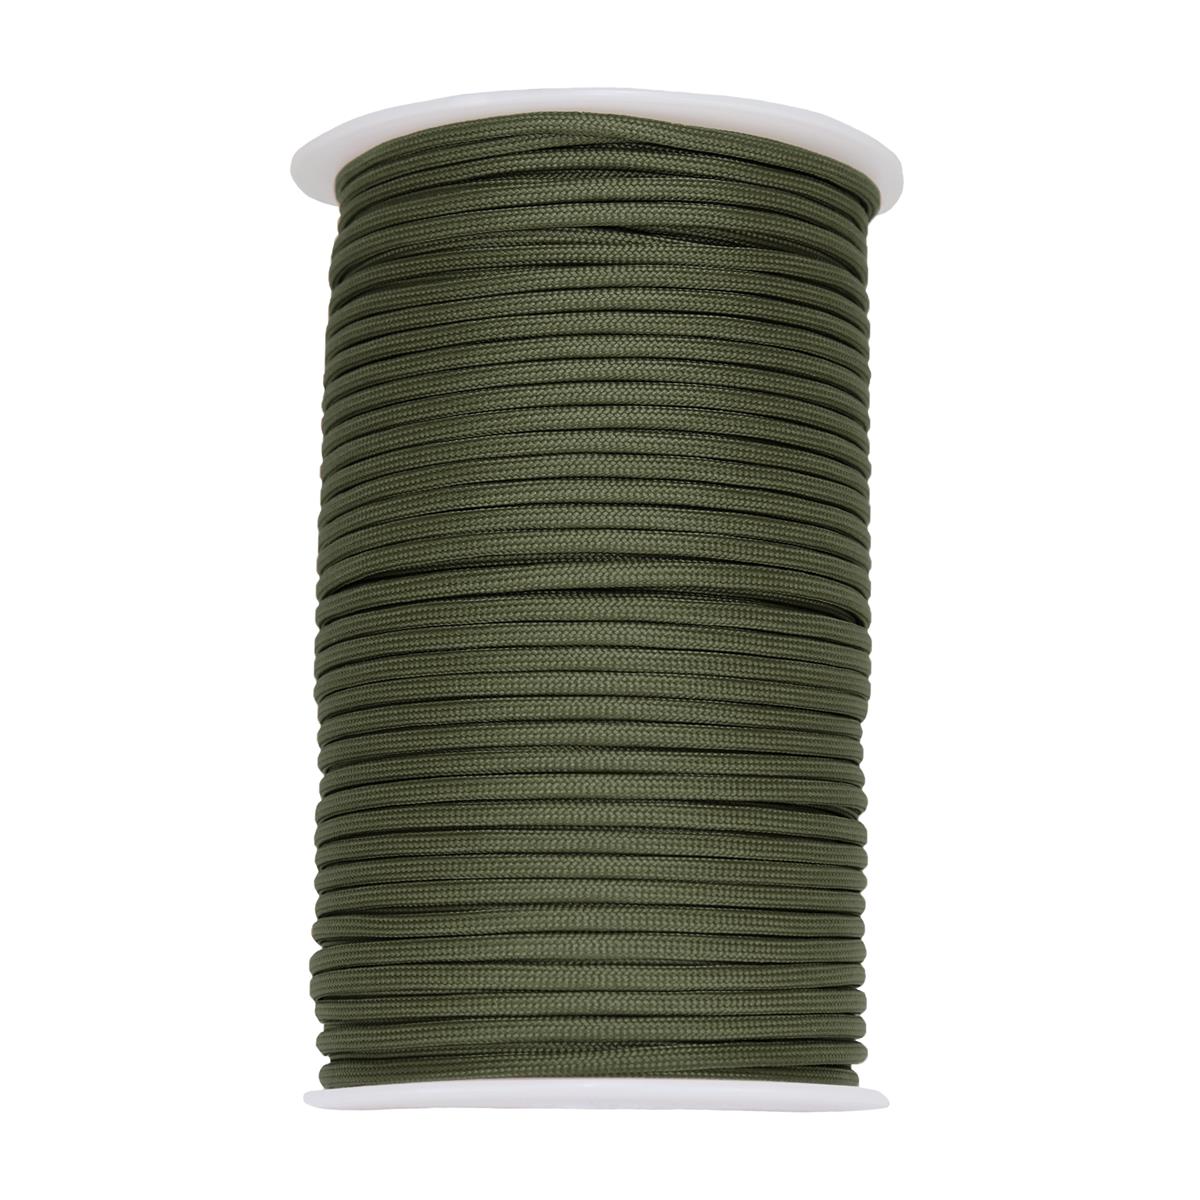 ROPE 4mm 100M OLIVE